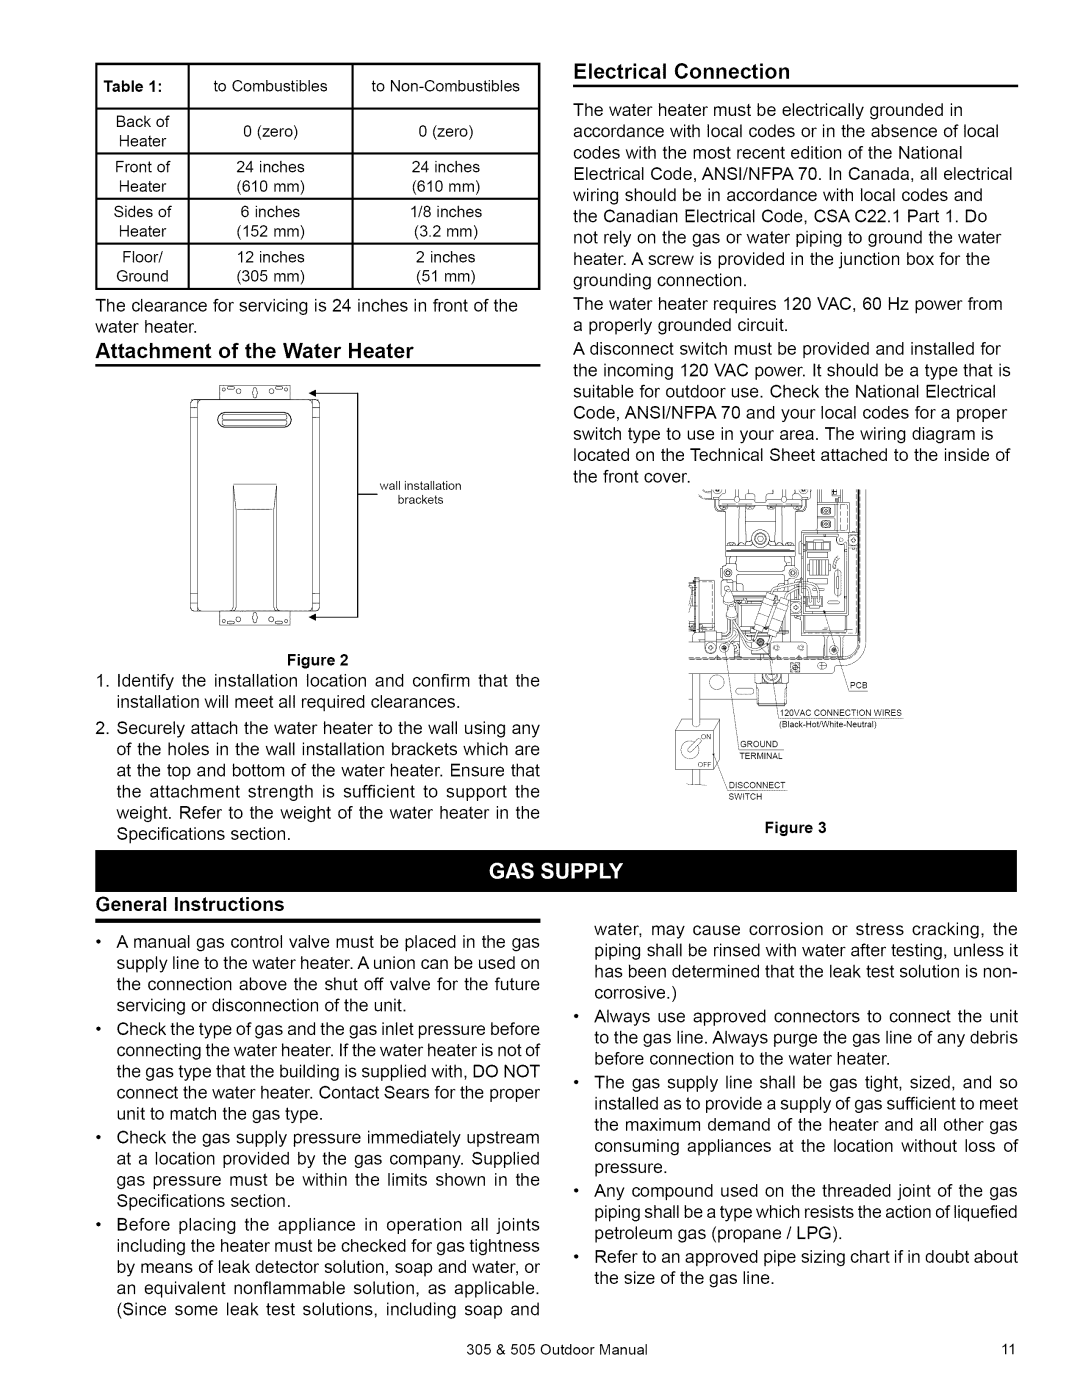 Kenmore 305, 505 owner manual i 120vAccoe,o22,RES..EcT, Attachment of the Water Heater, Electrical Connection 